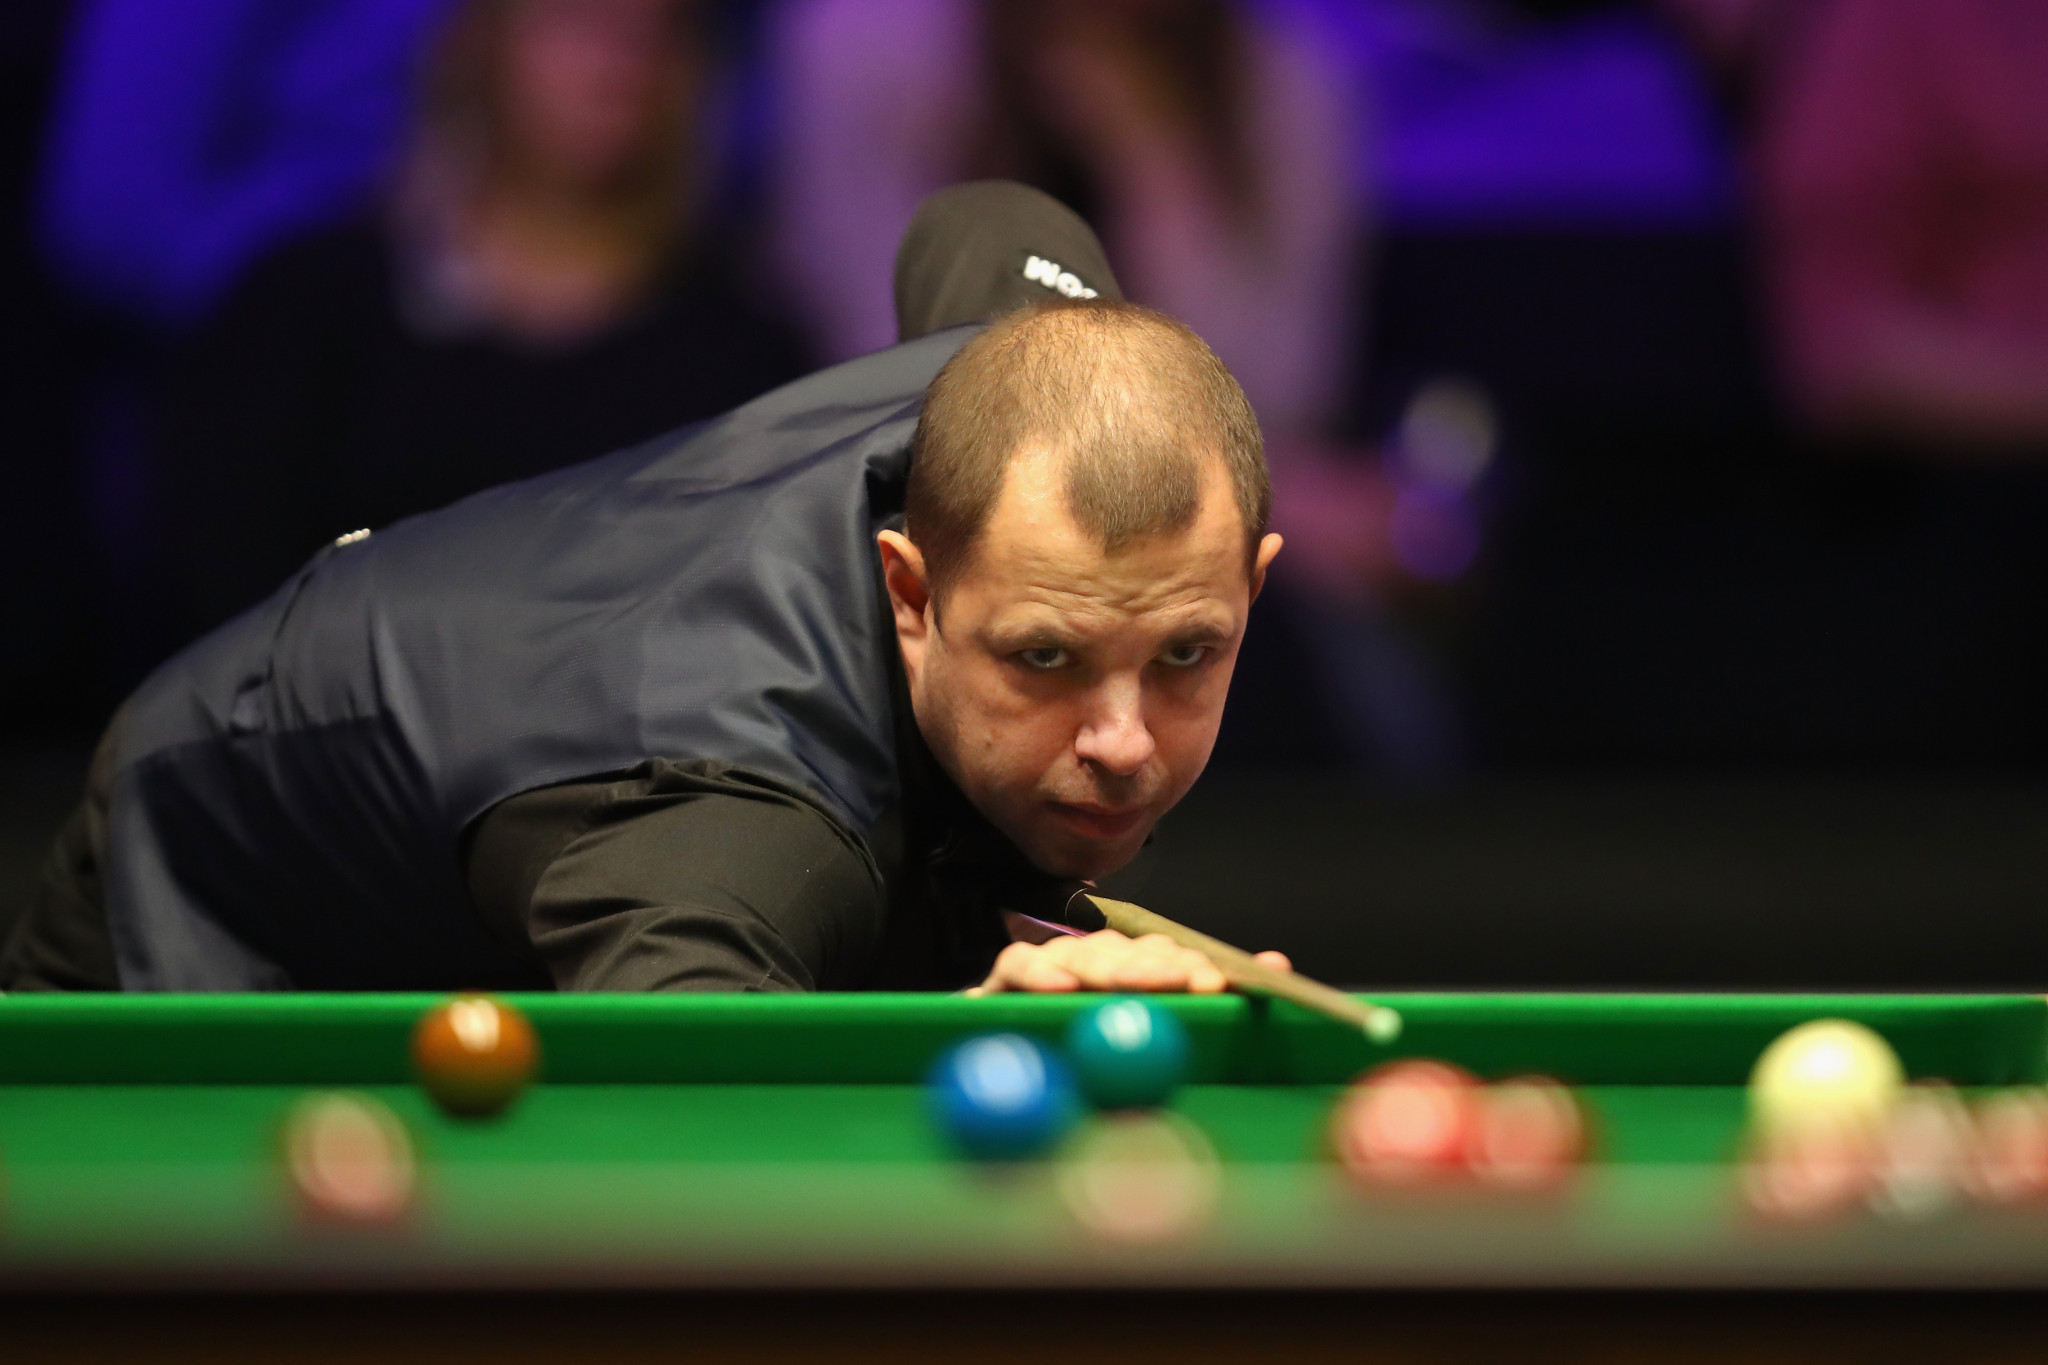 England's Barry Hawkins has booked his place in the quarter-finals ©Getty Images